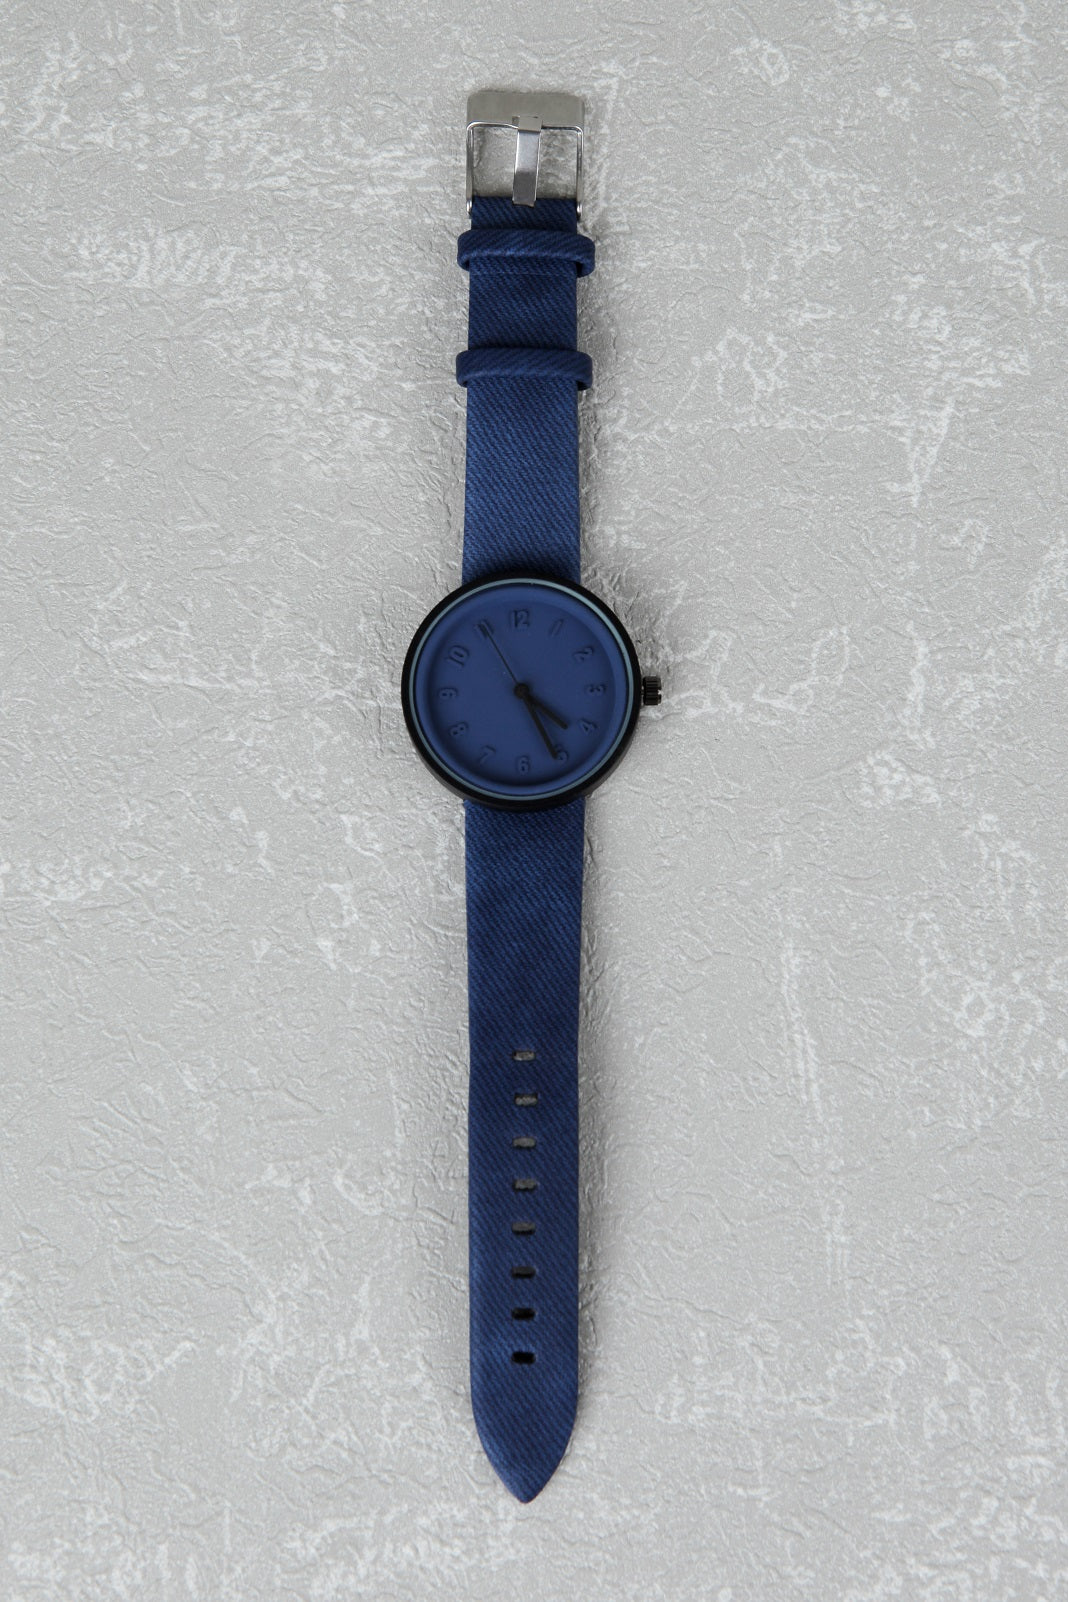 ANDREW SMITH - WATCH (BLUE)